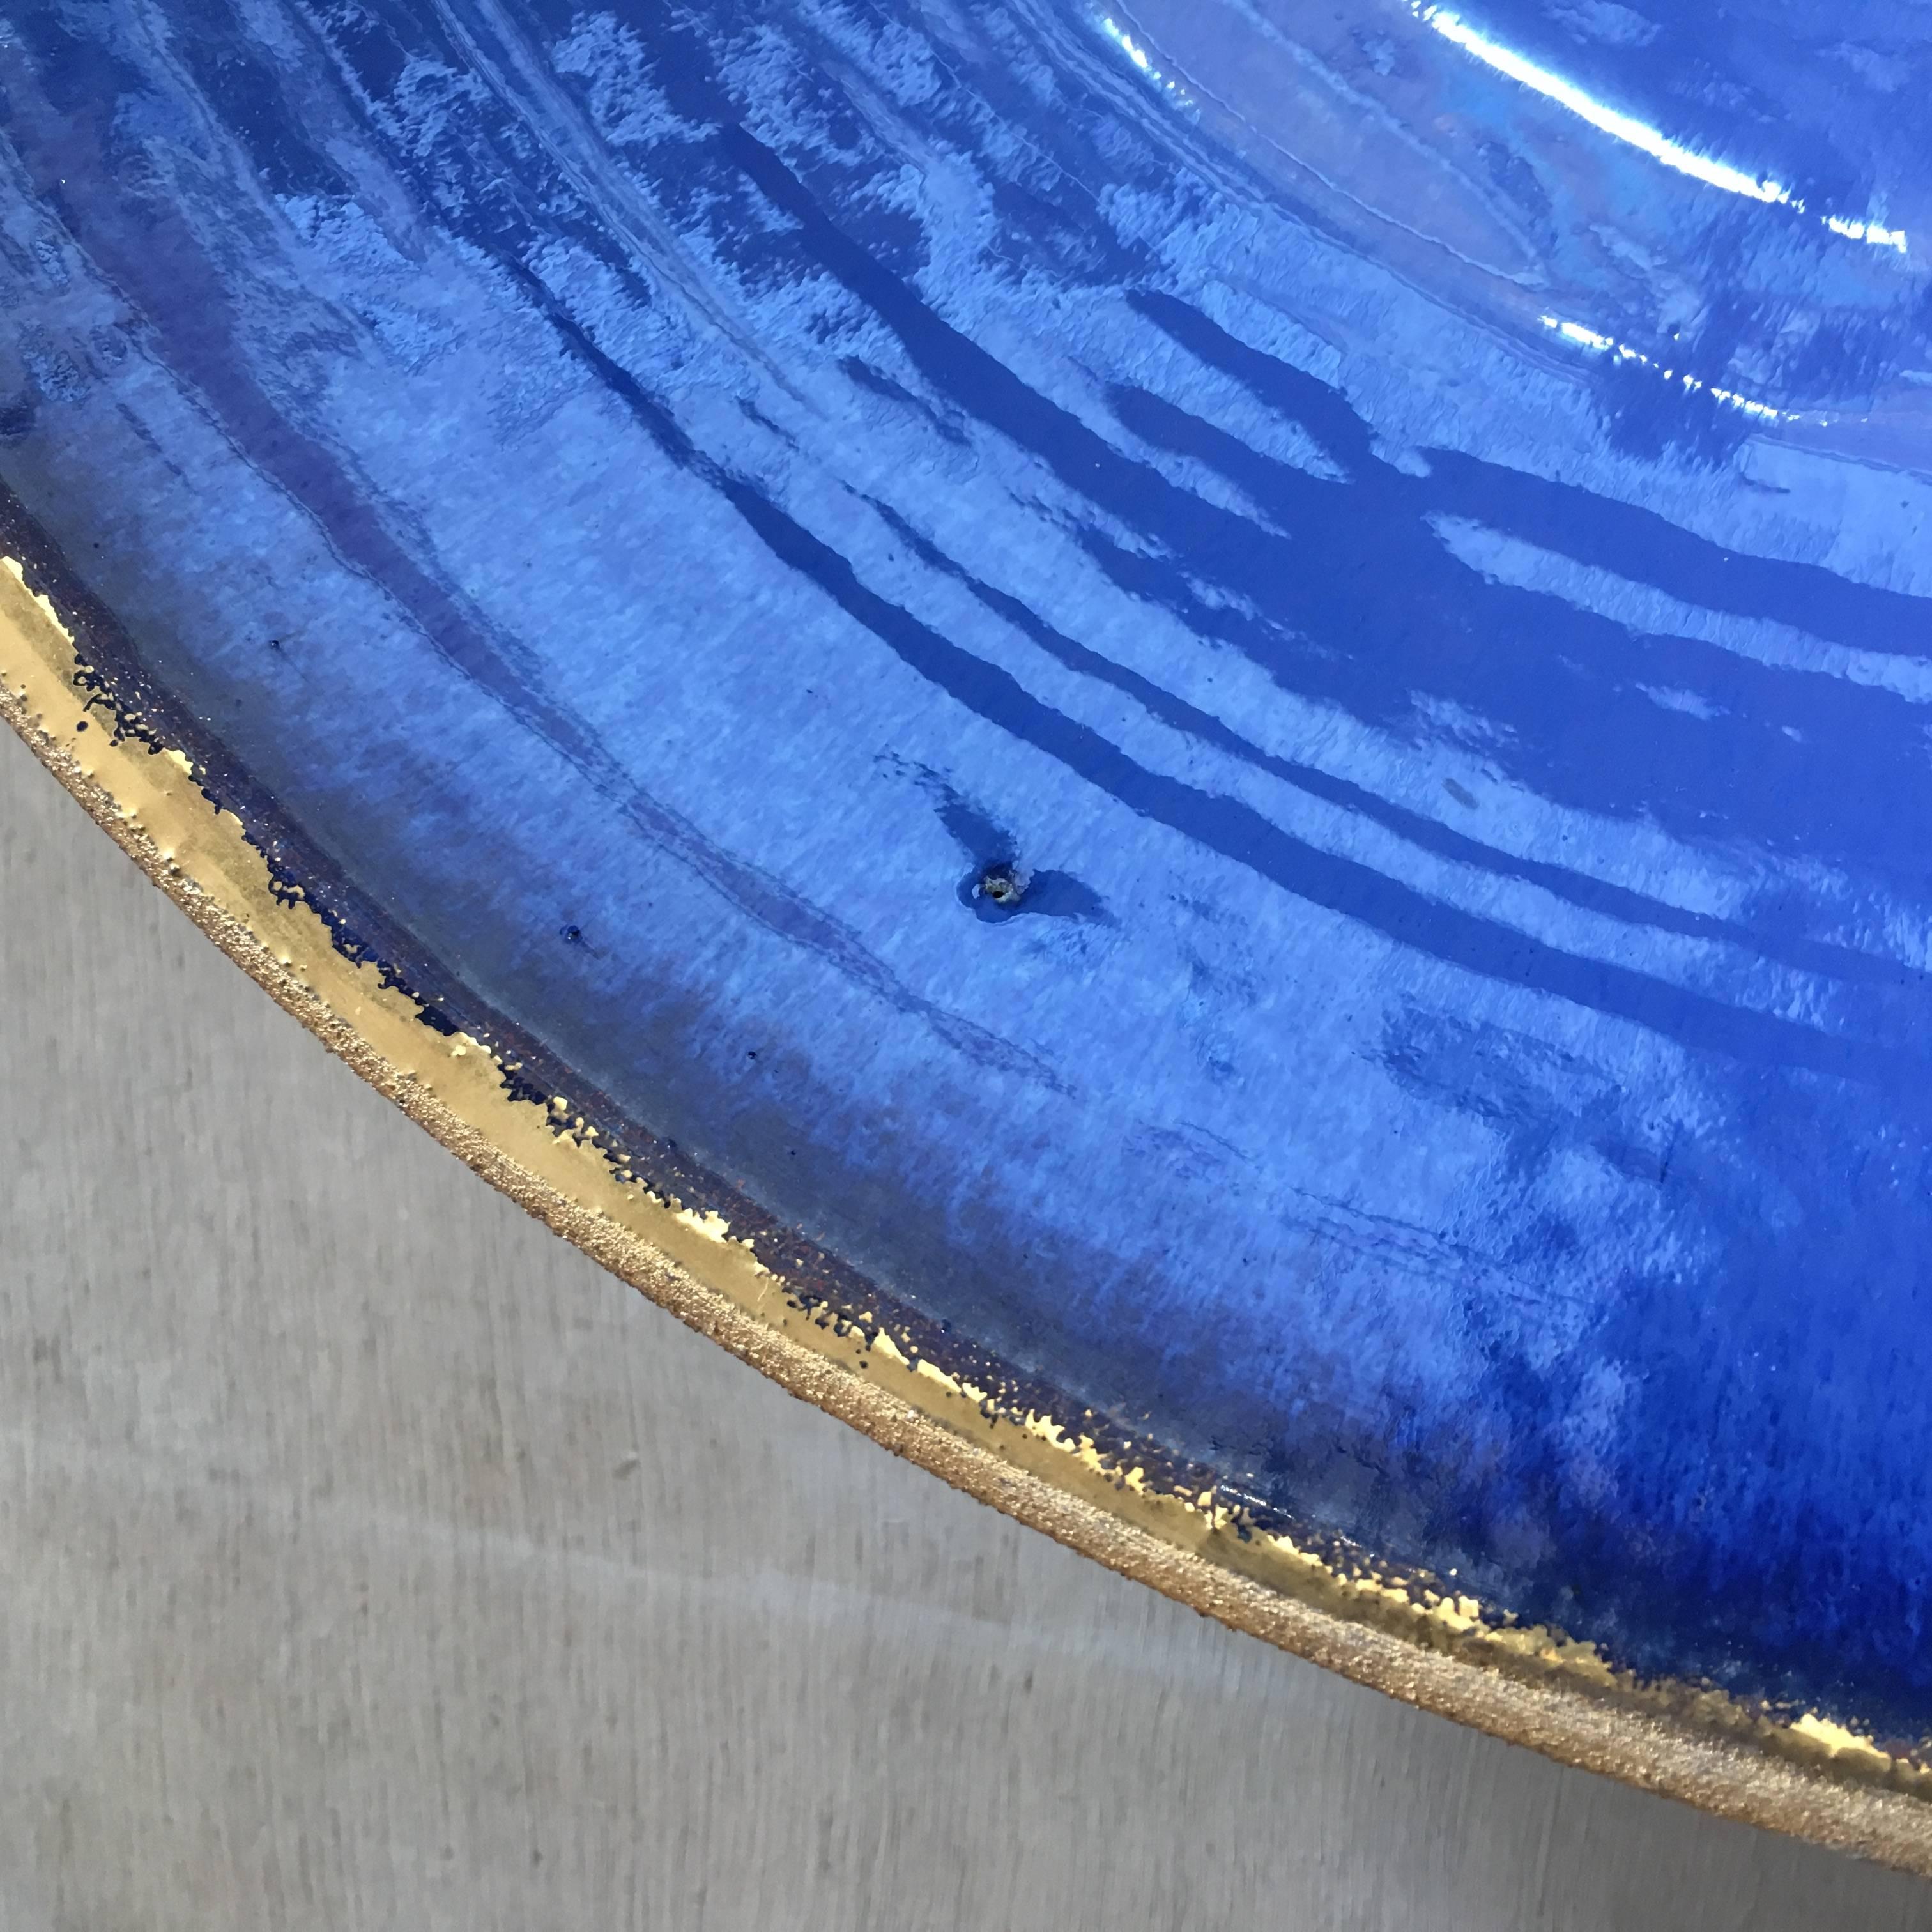 Red stoneware wide bowl, blue glazed and pure gold.

Unique work of art by Karen Swami, 2017.

Measure: 13 cm high x 45 cm diameter

Pièce unique, signed/stamped.